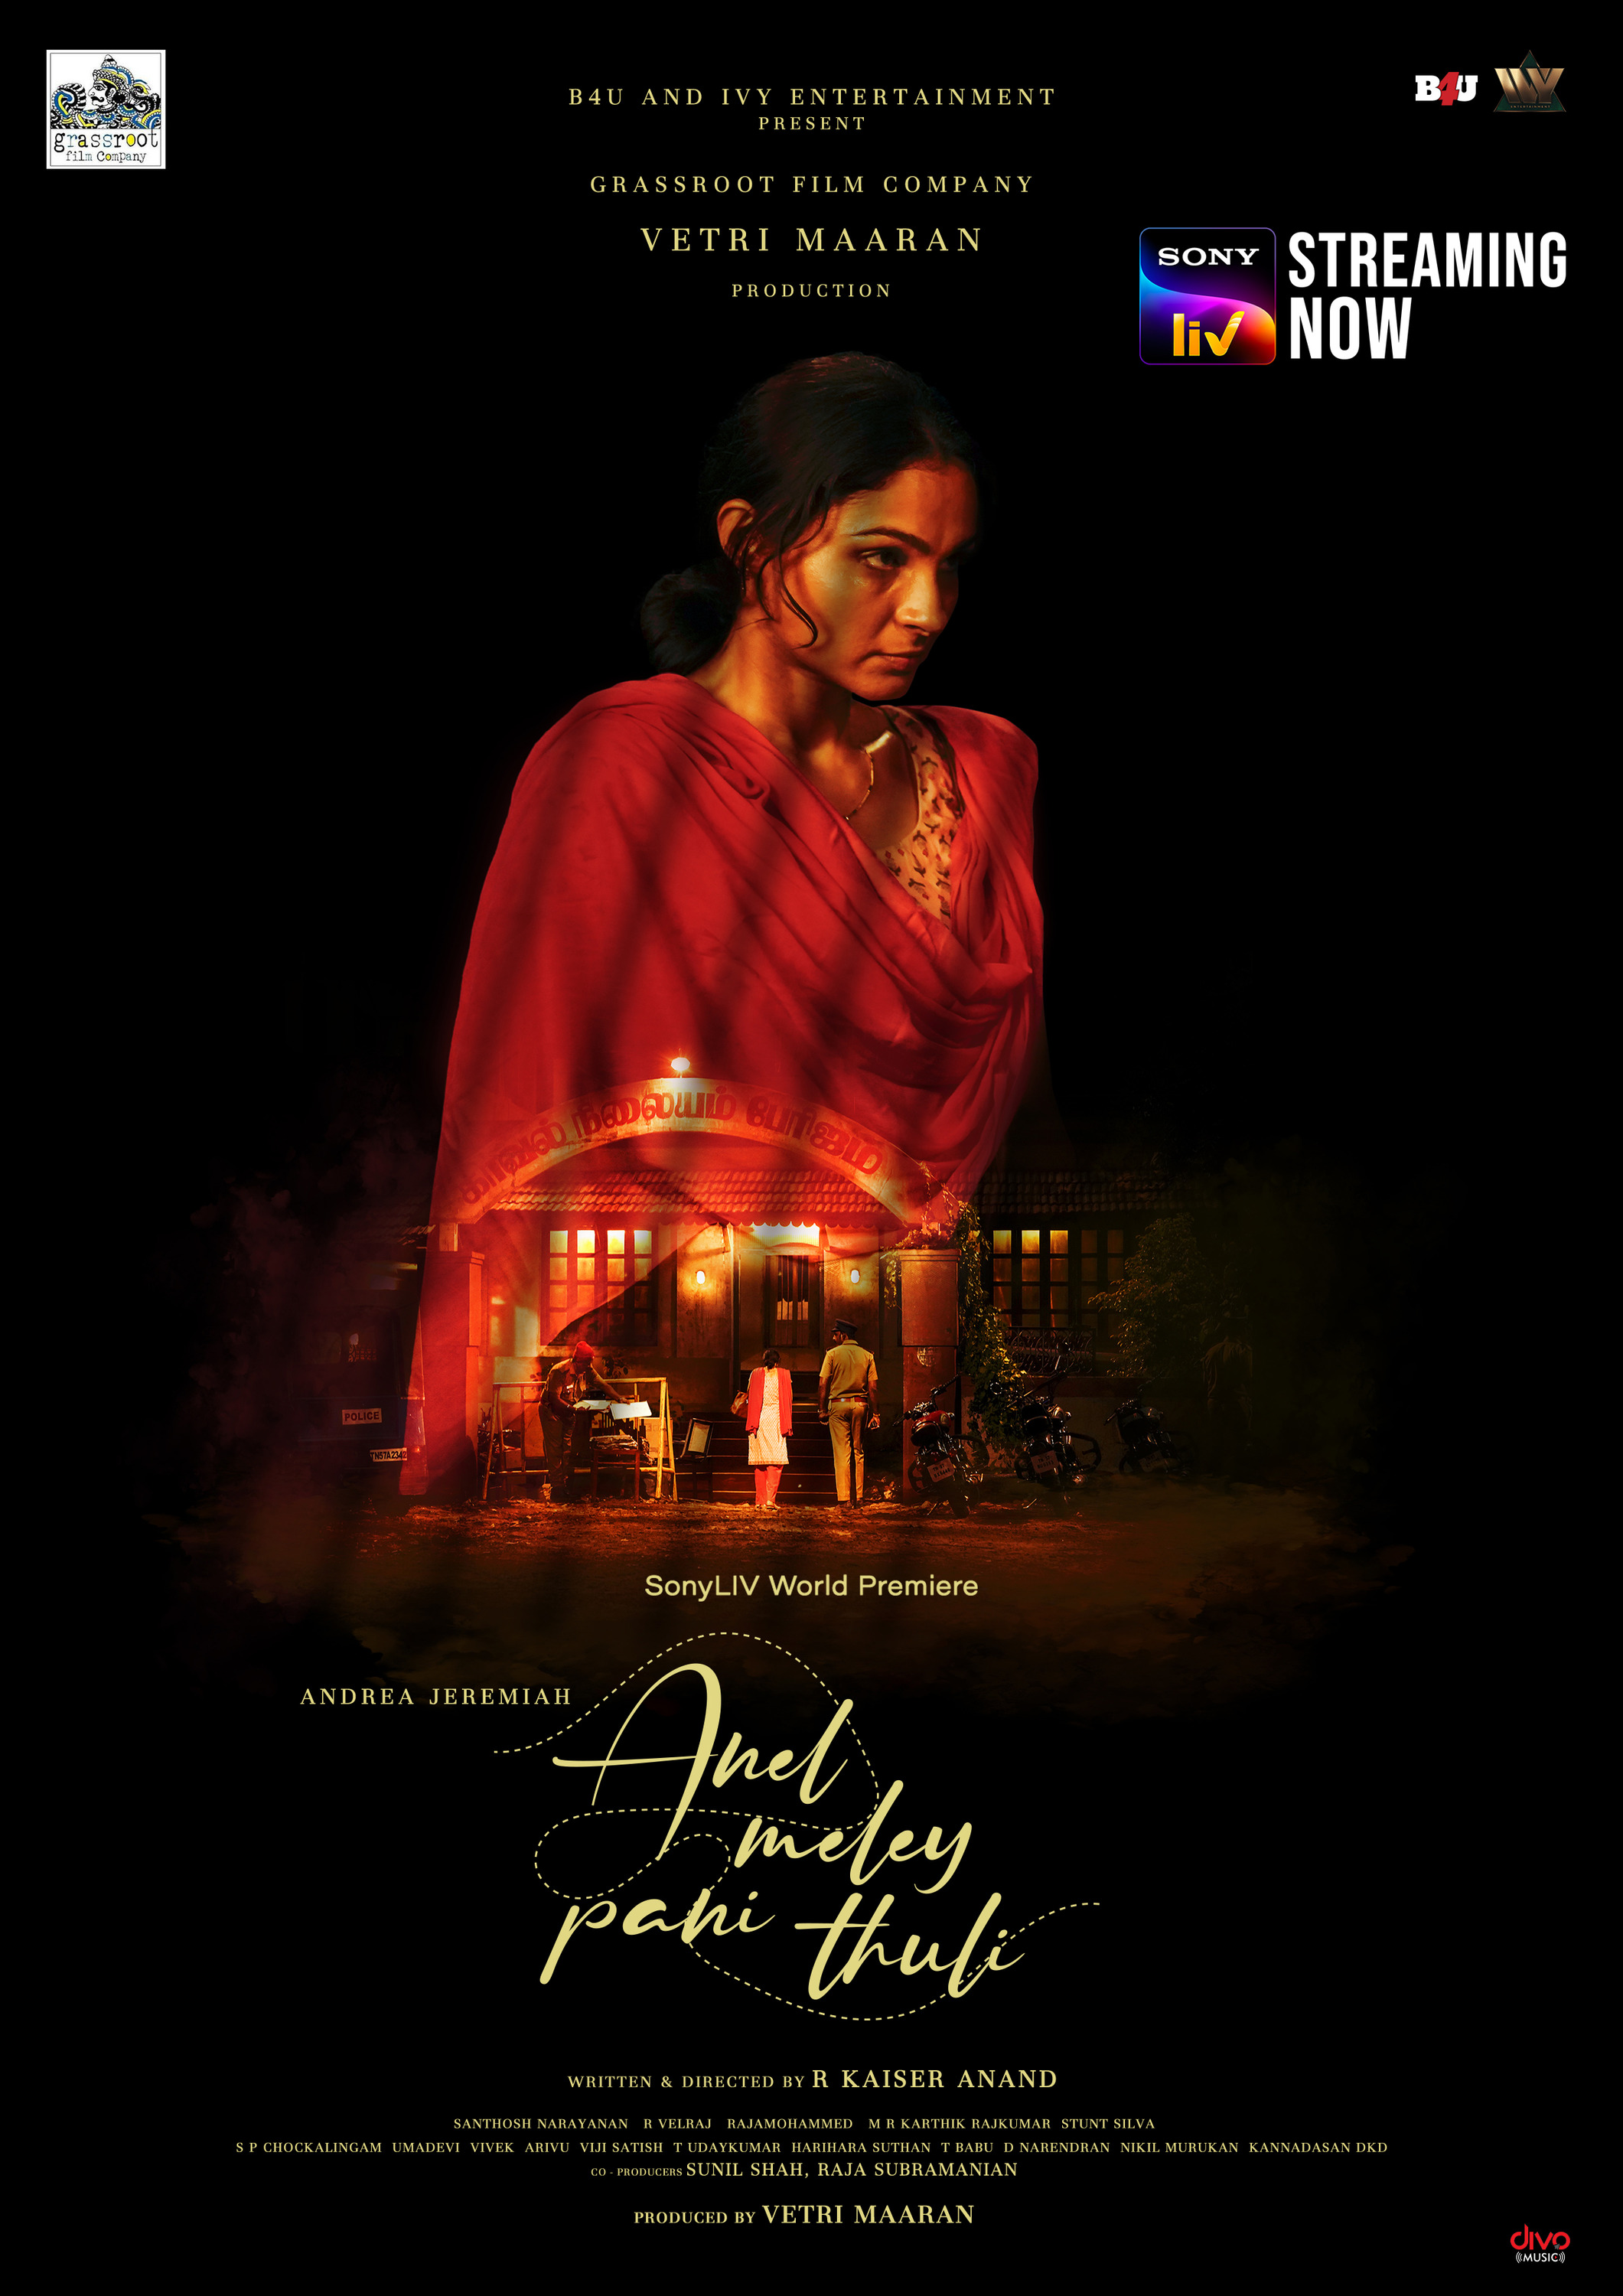 Mega Sized Movie Poster Image for Anel Meley Panithuli (#4 of 7)